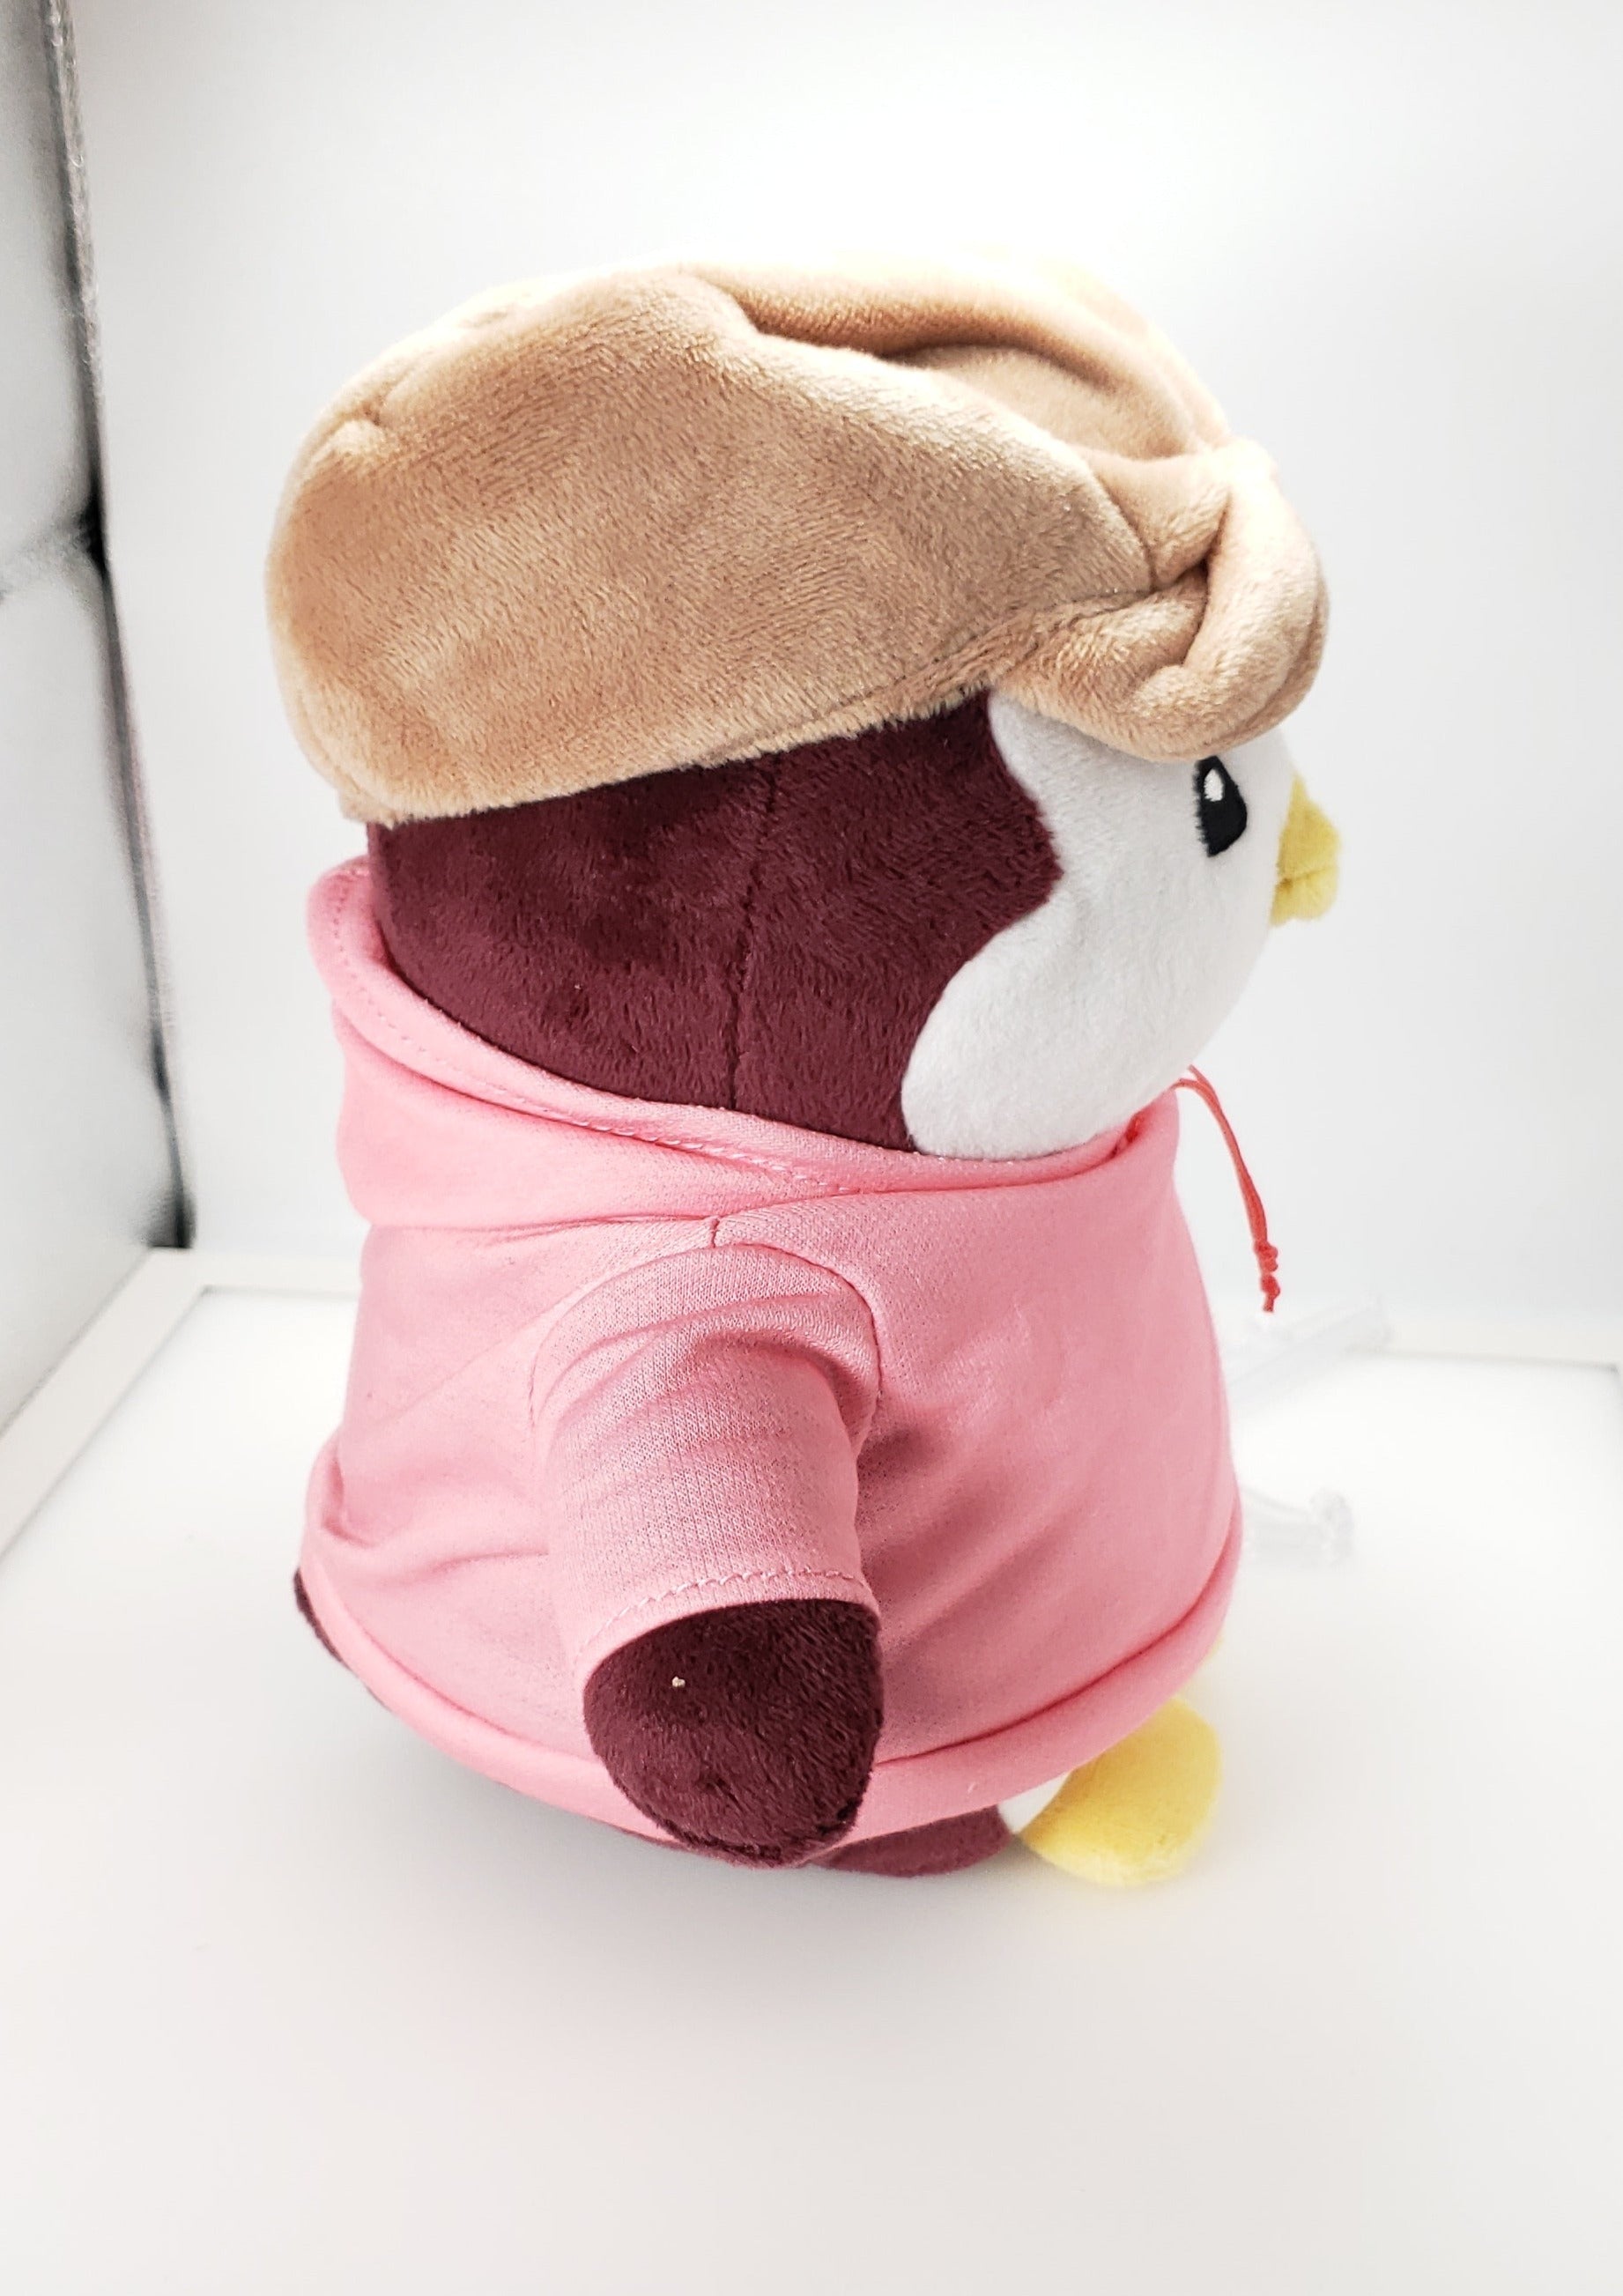 Pudgy Penguins Plush - Hat and Pink Hoodie 8inch